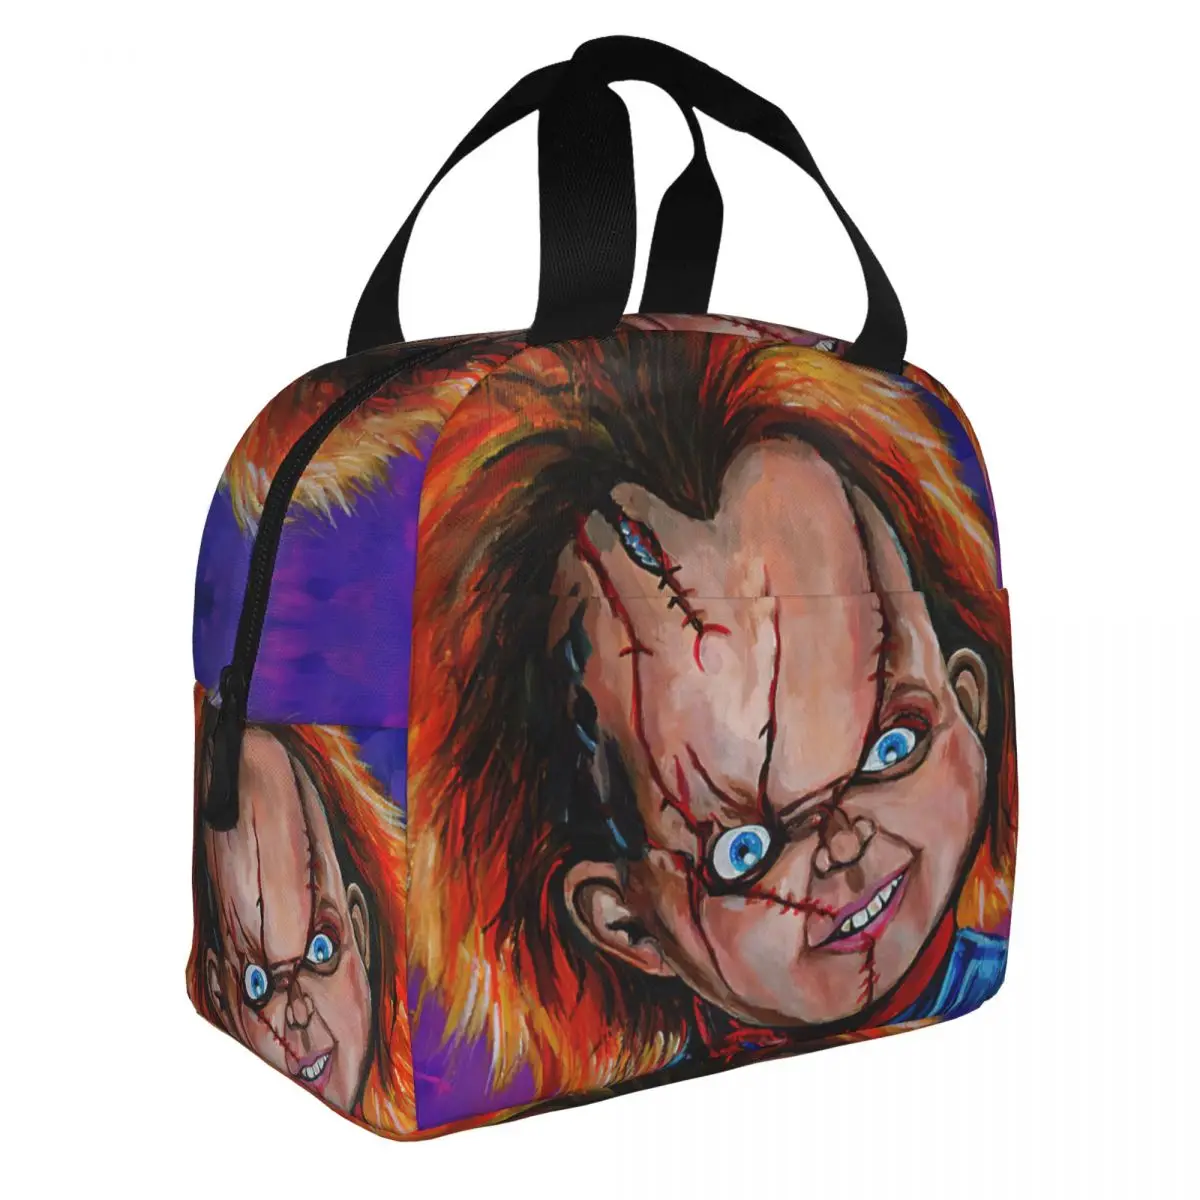 Chucky Lunch Bento Bags Portable Aluminum Foil thickened Thermal Cloth Lunch Bag for Women Men Boy